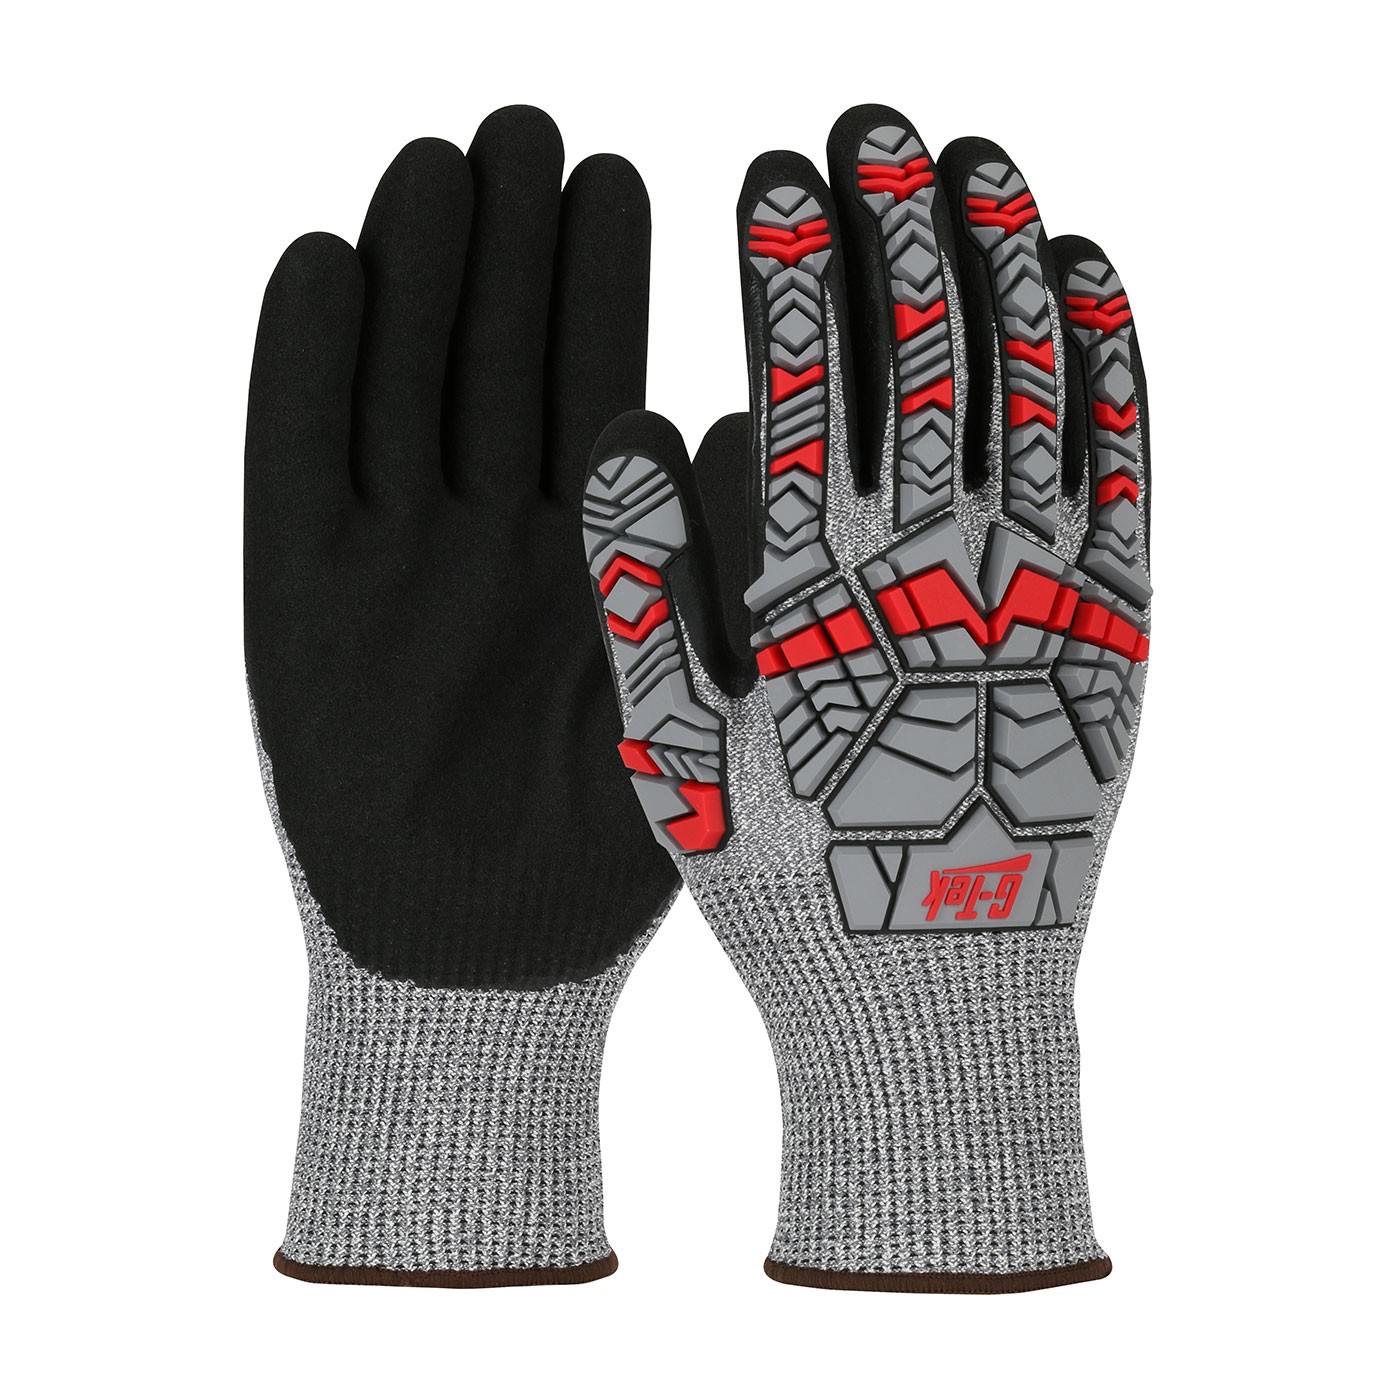 G-Tek® PolyKor® Seamless Knit PolyKor® Blended Glove with Impact Protection and Double-Dipped Nitrile Coated MicroSurface Grip on Palm & Fingers  (#16-MPH430)